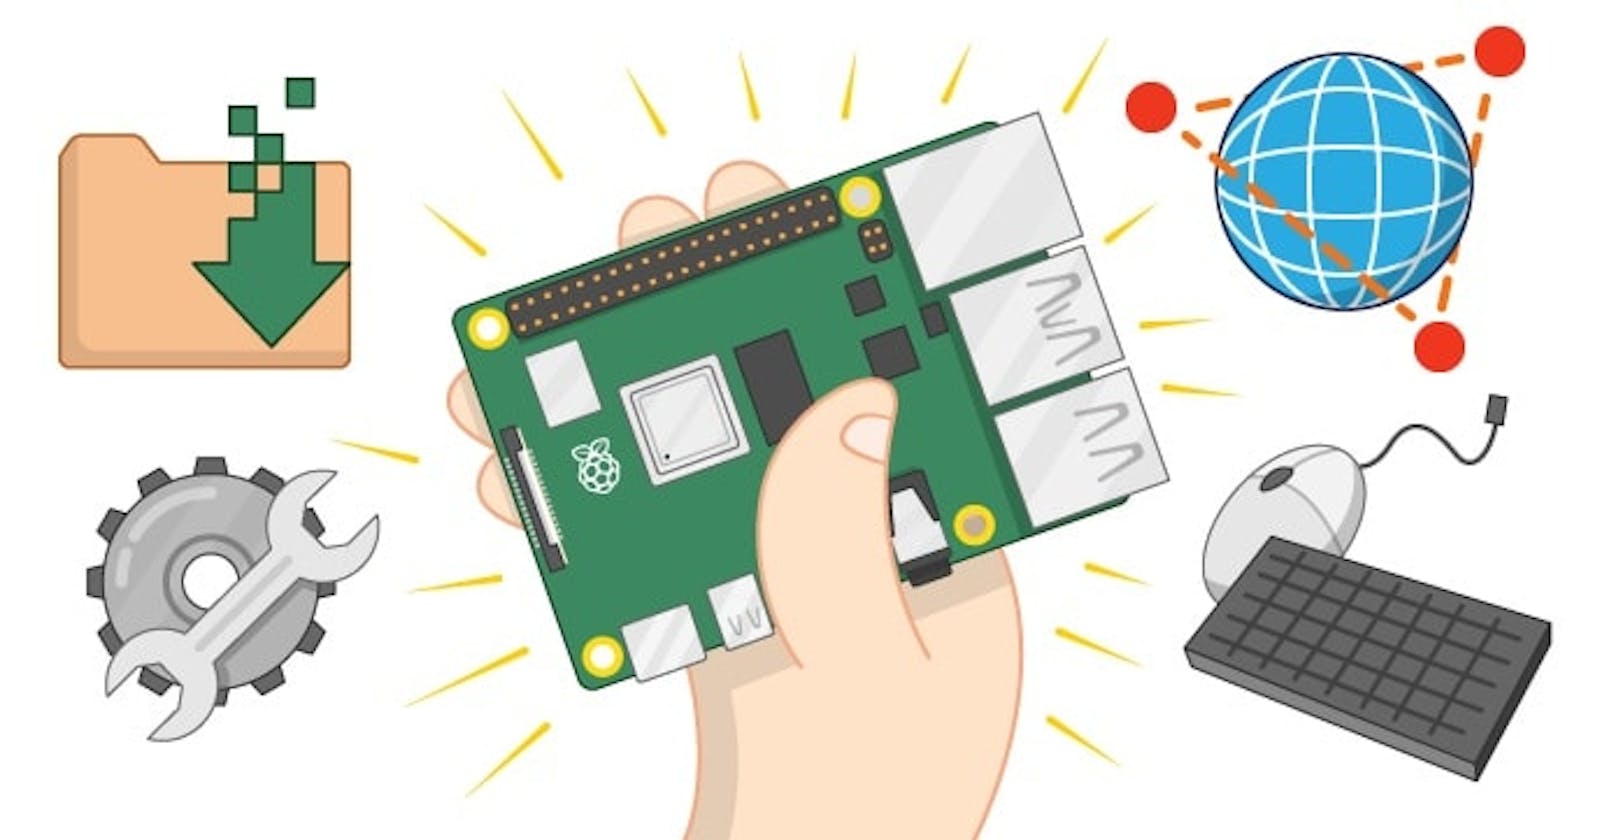 Introduction To Raspberry Pi